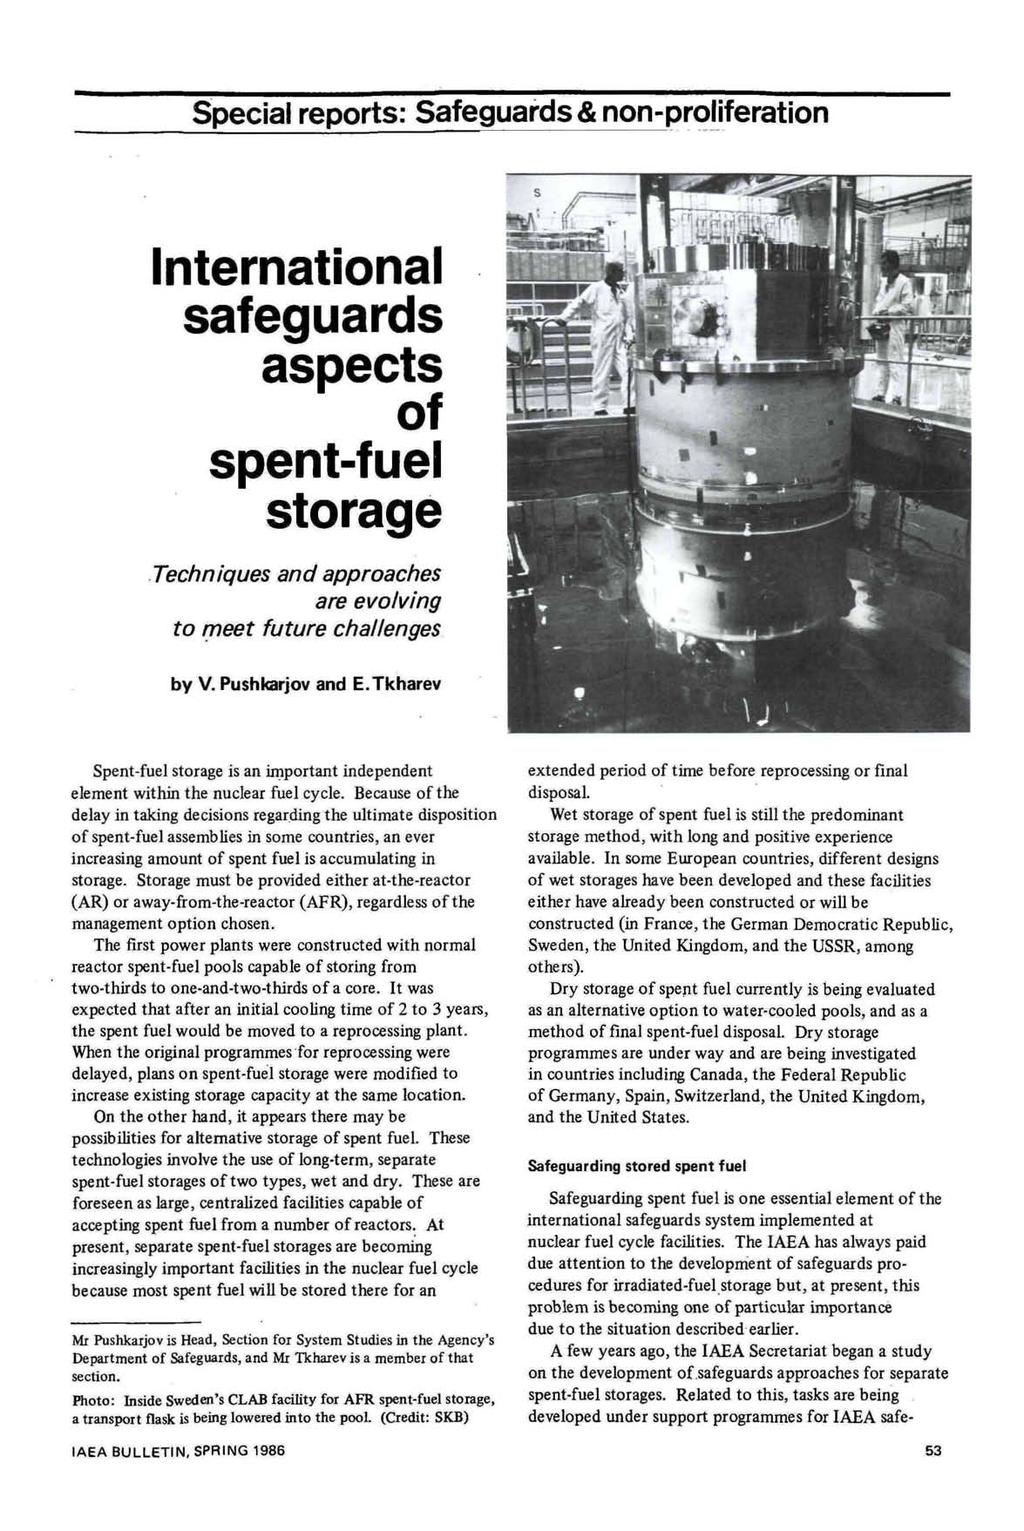 : Safeguards & non-proliferation International safeguards aspects of spent-fuel storage Techniques and approaches are evolving to meet future challenges by V. Pushkarjov and E.